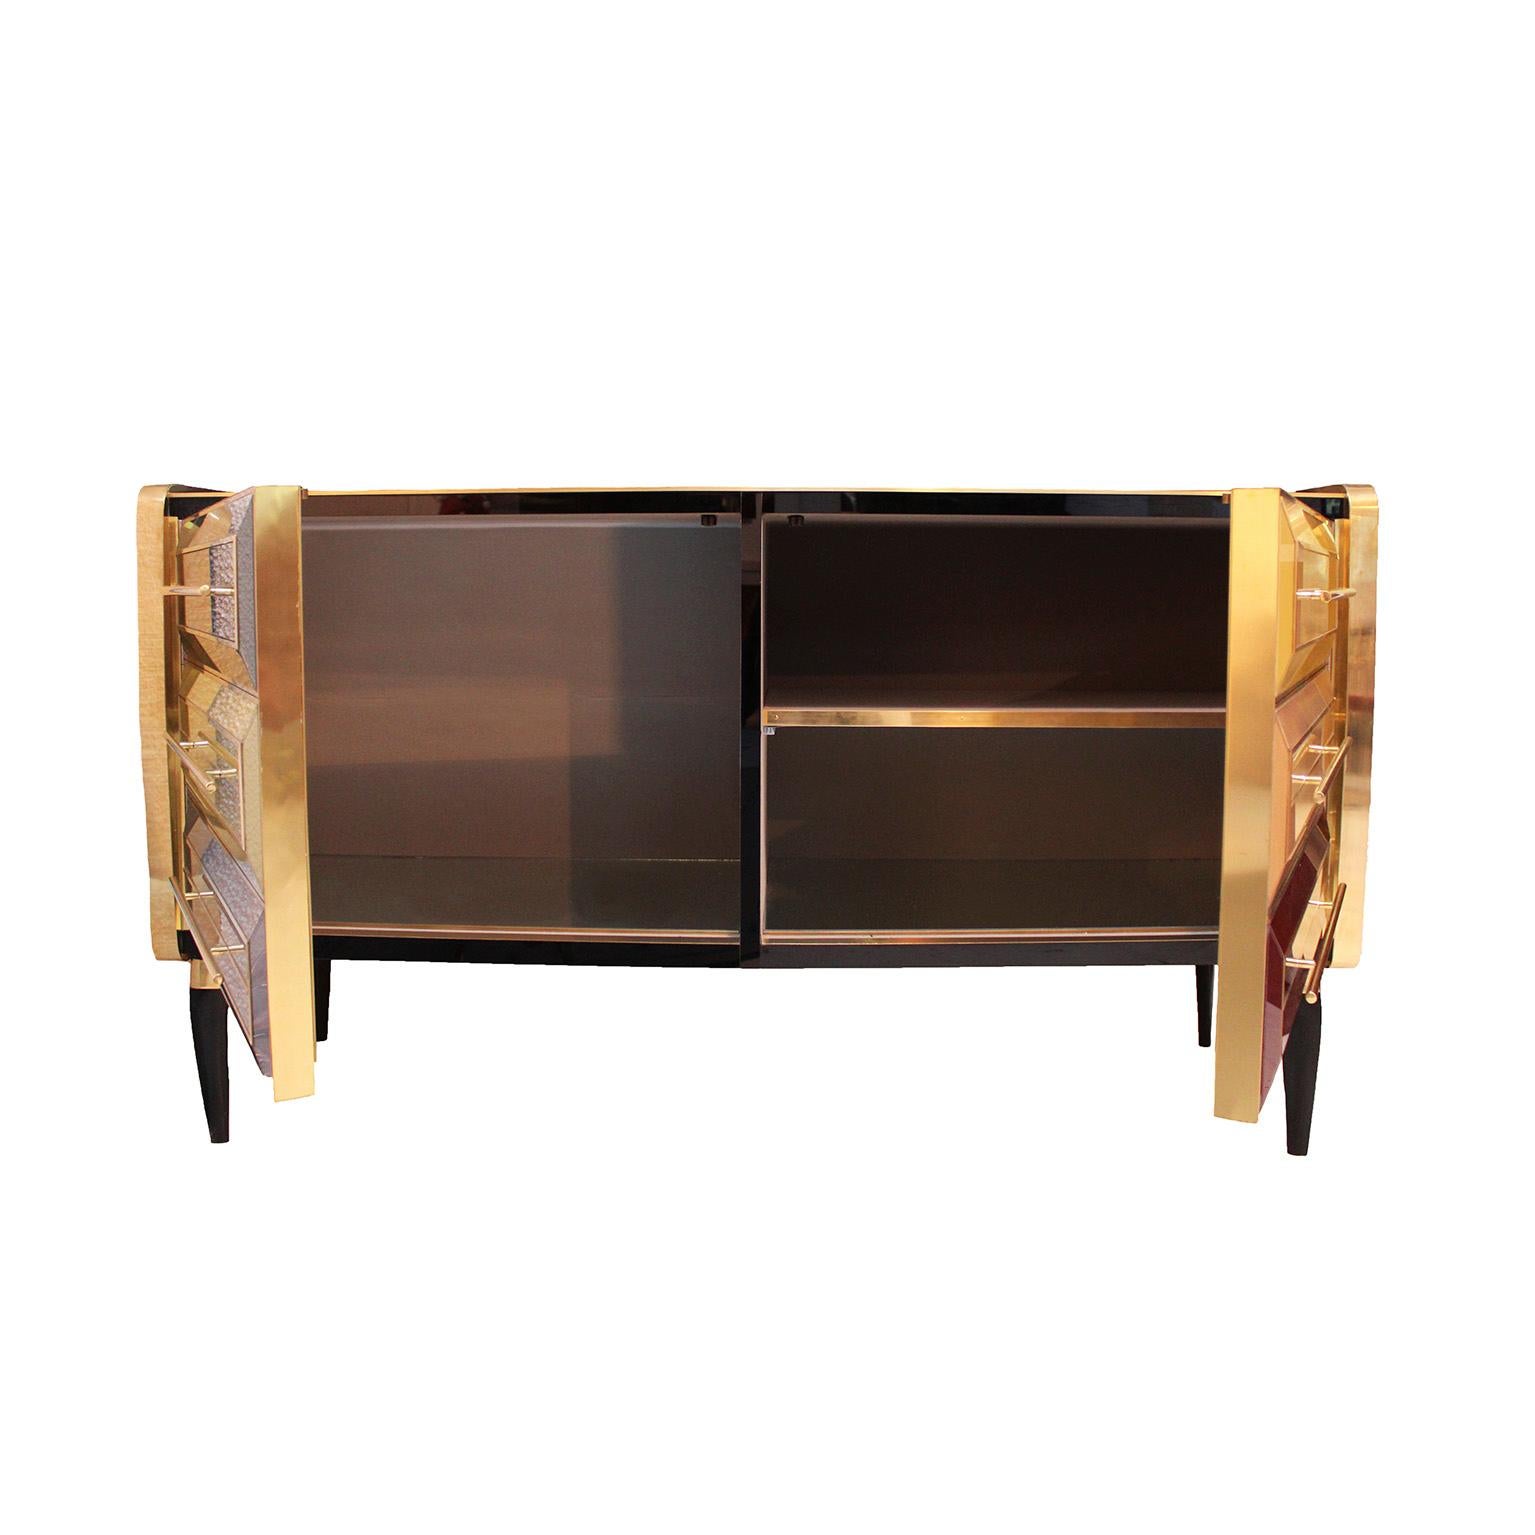 Bar cabinet consisting of 2 doors with an original structure from the 1950s made of solid wood and covered with colored glass. Sculptural legs made of solid wood. Handles and profiles made of brass.

Production time between 5 and 6